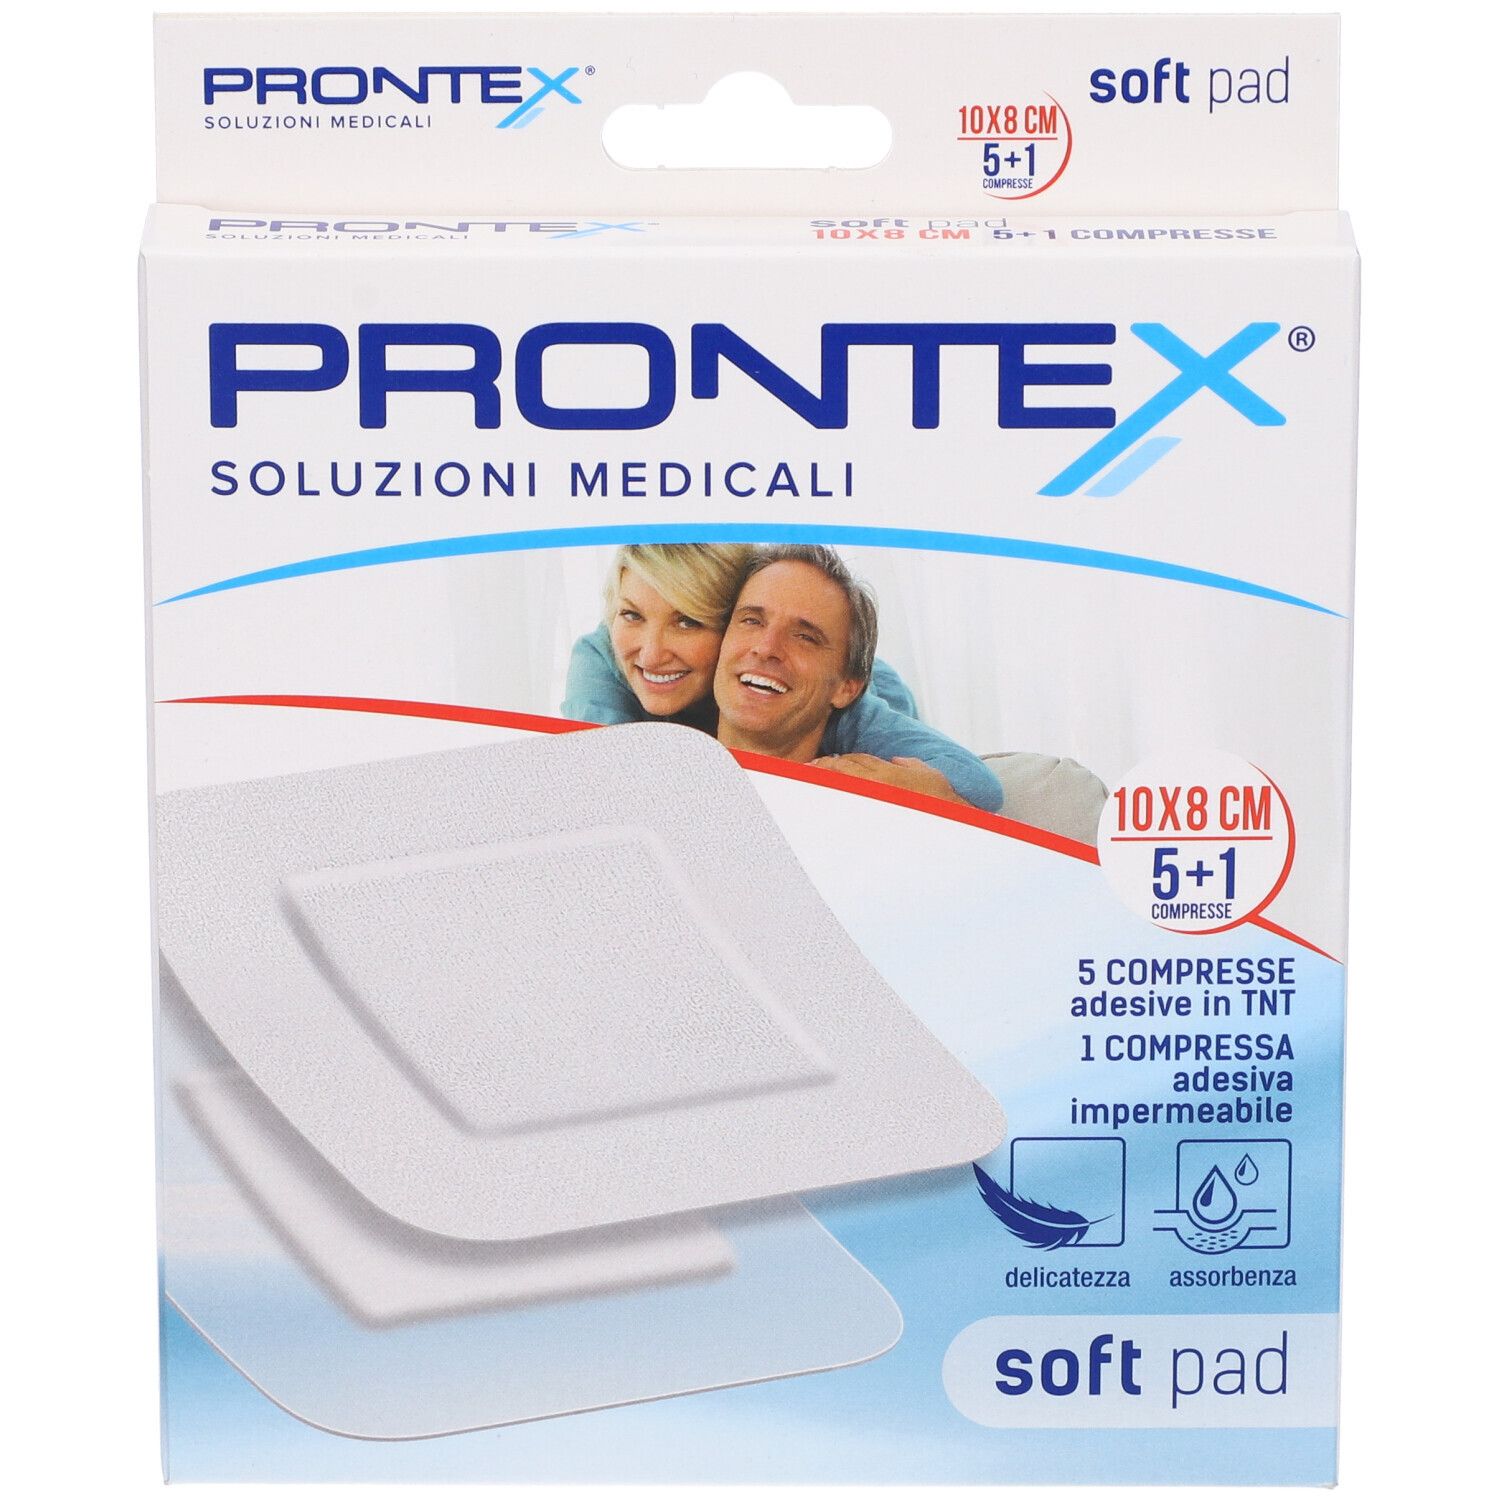 Safety PRONTEX Soft Pad 10 x 8 cm 5 compresse in tnt + 1 impermeabile